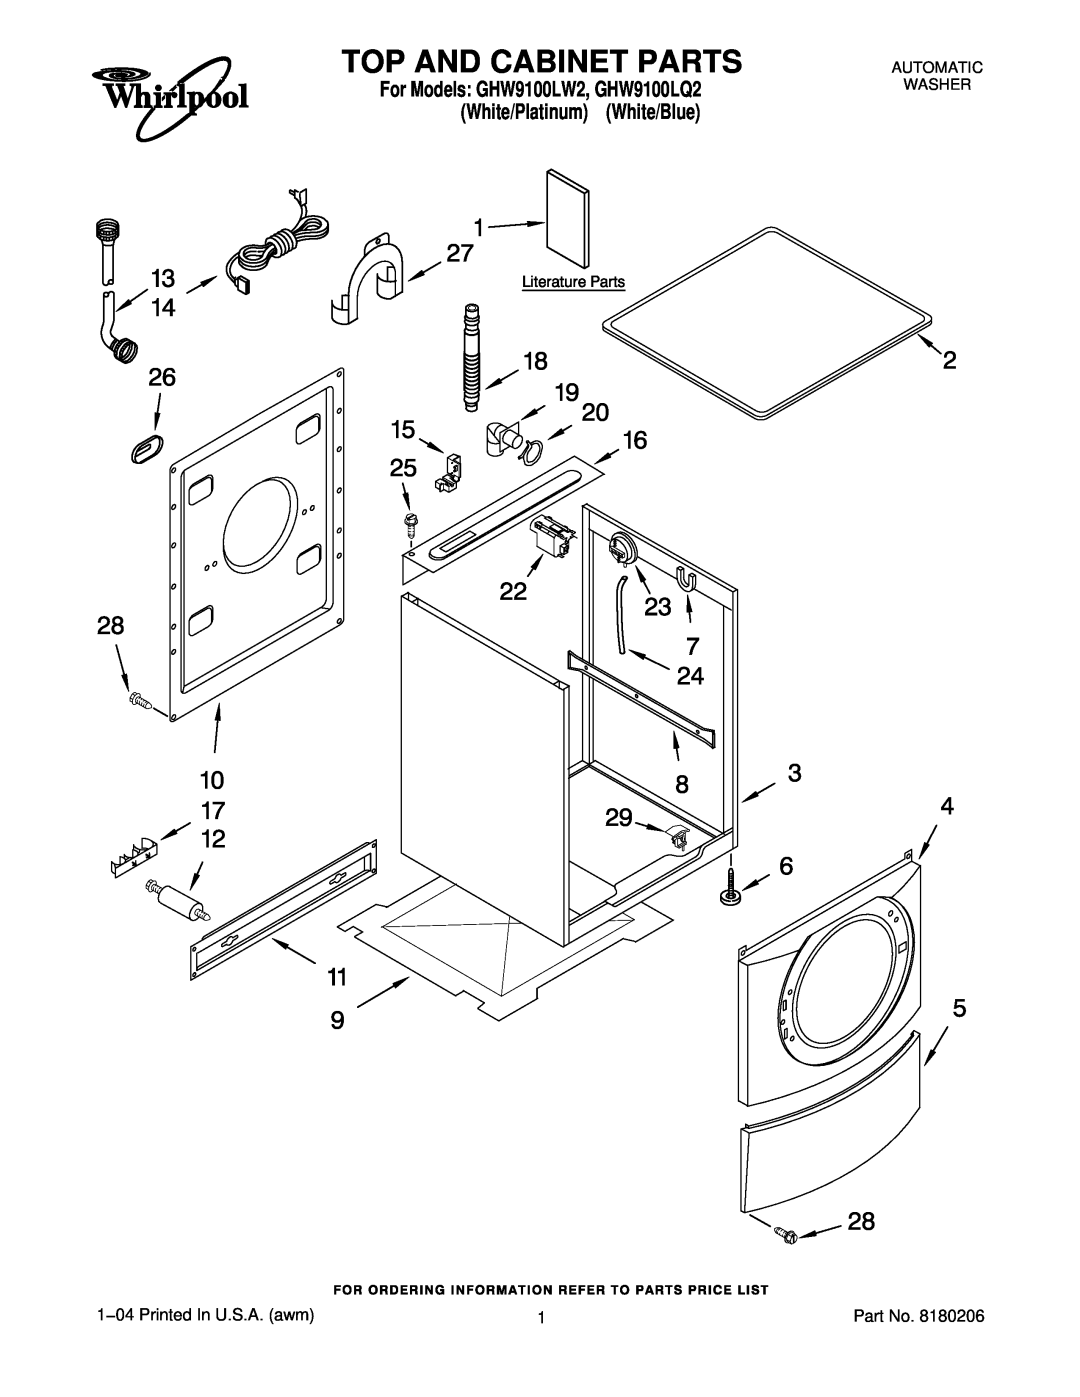 Whirlpool GHW9100LQ2 manual Top And Cabinet Parts, 1−04 Printed In U.S.A. awm, Automatic Washer 